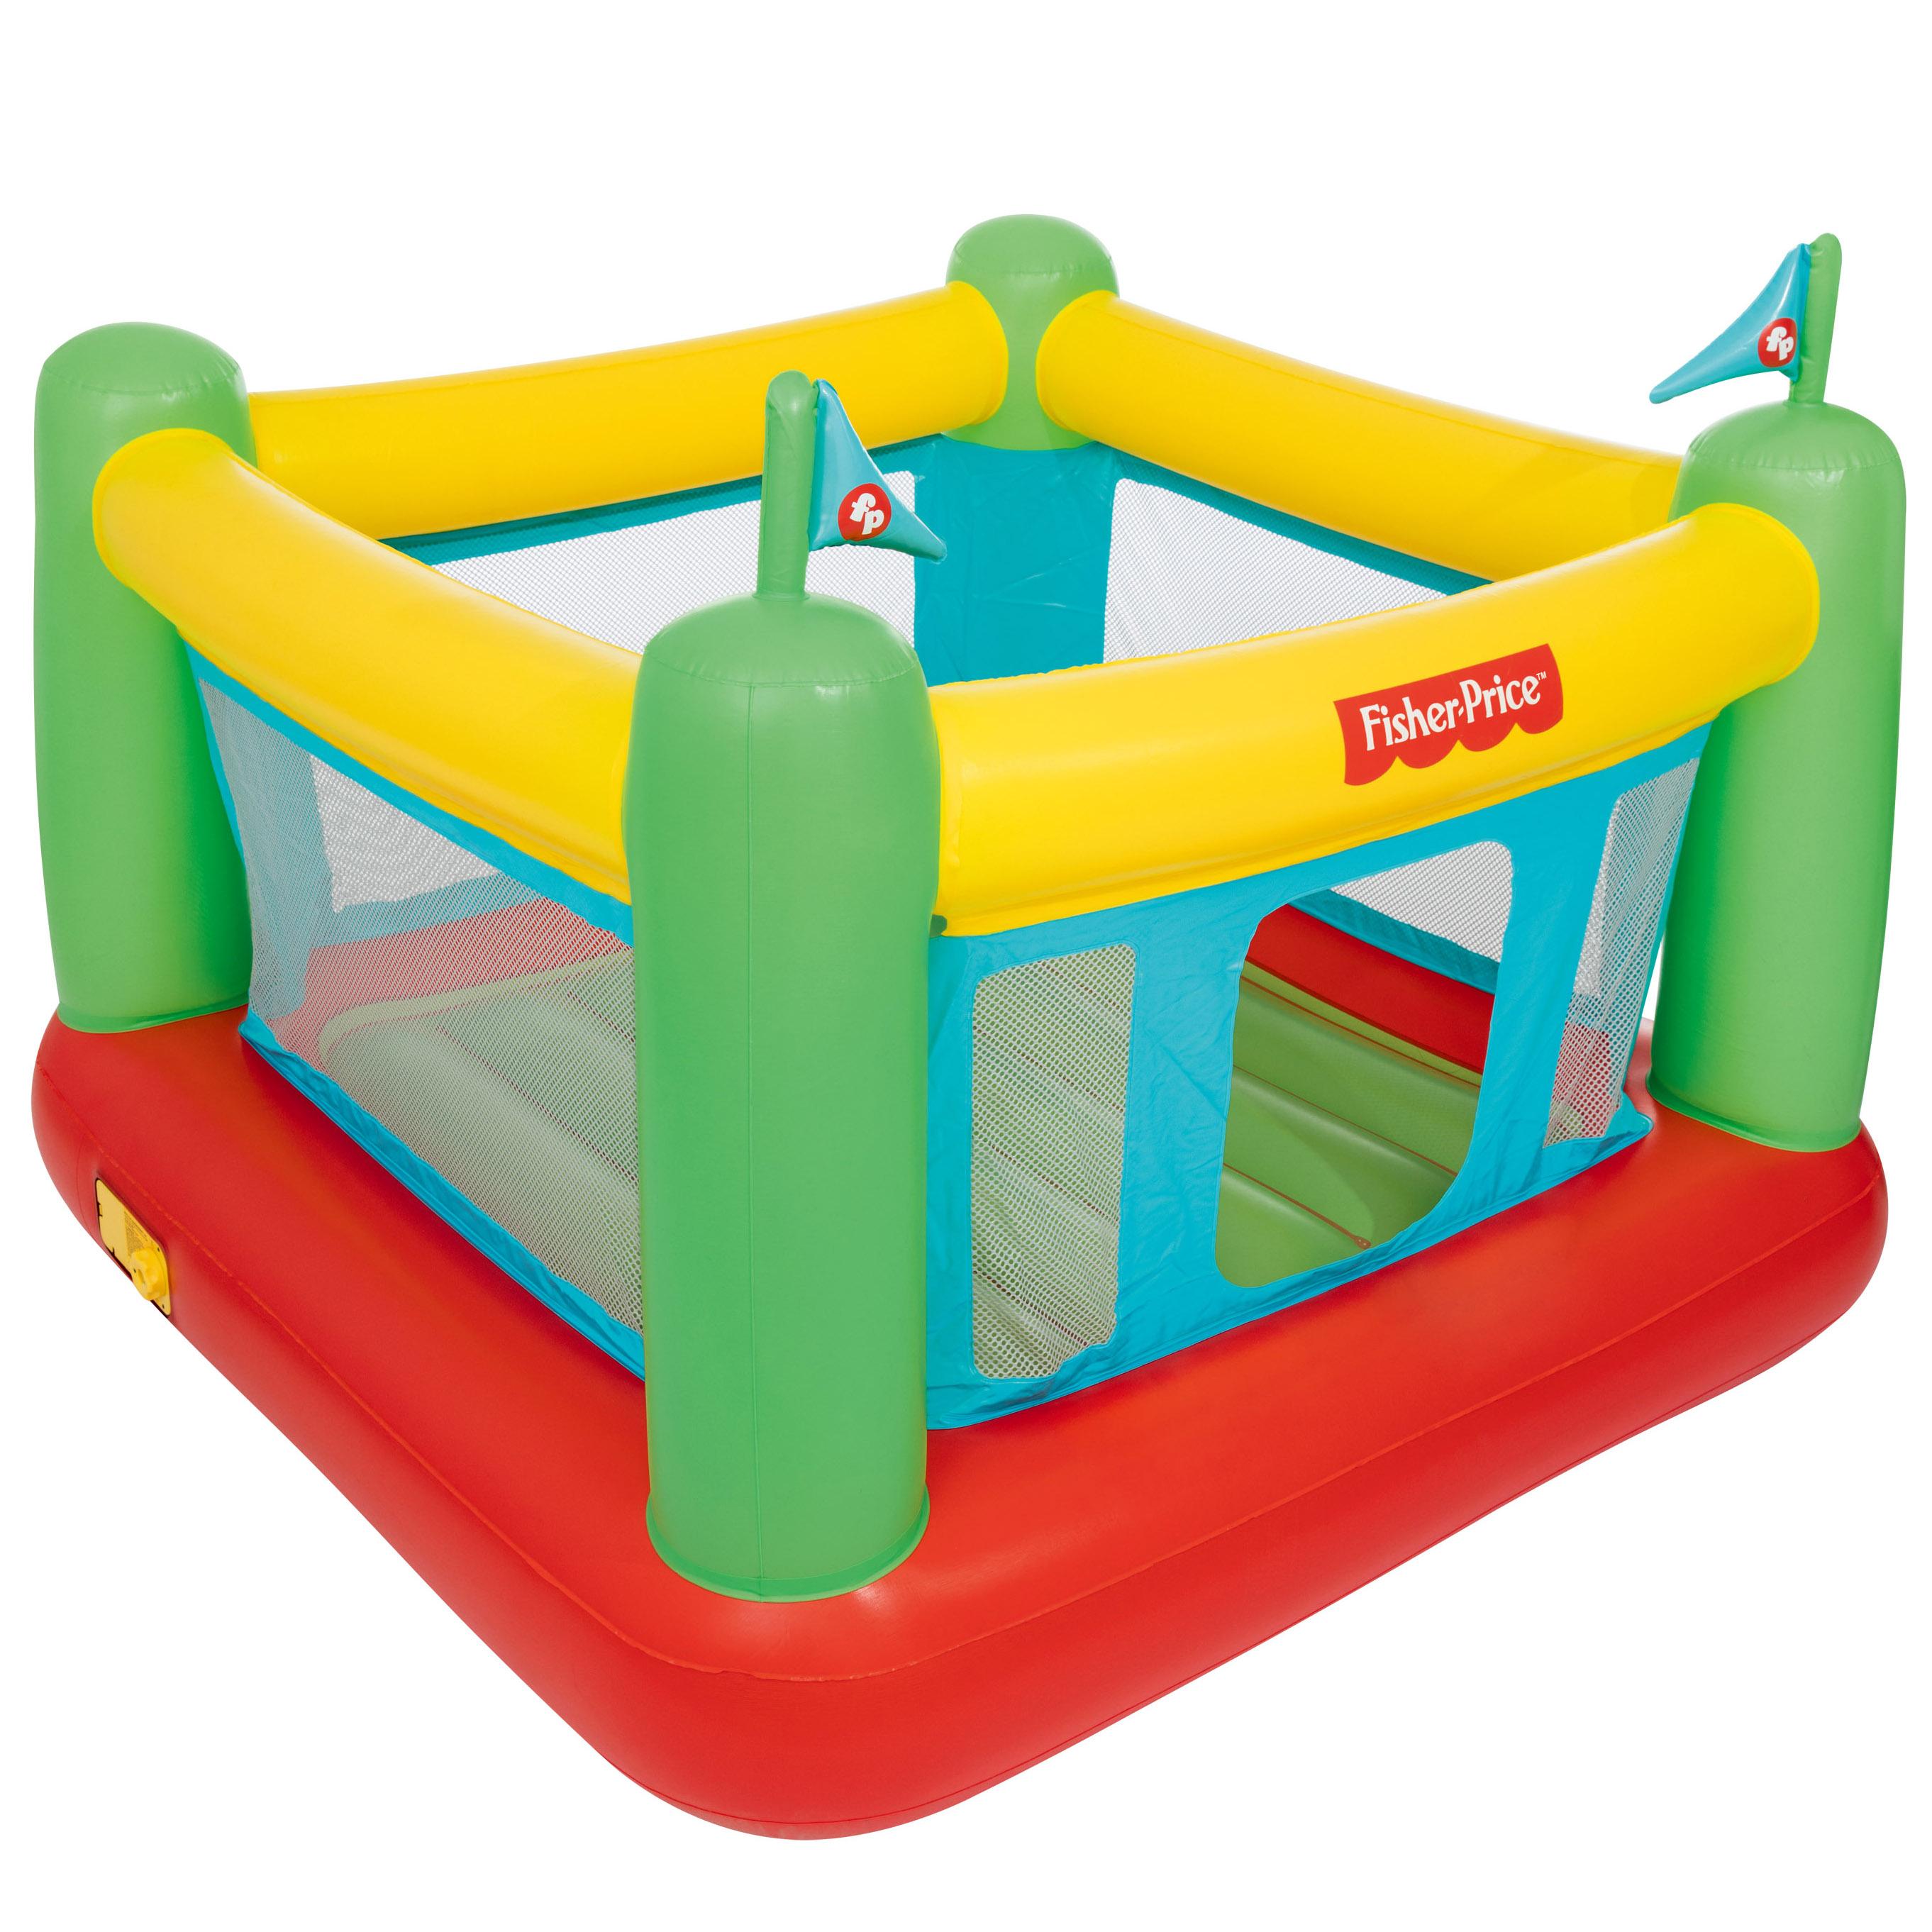 Fisher-Price Bouncesational Bounce House for $59.97 Shipped